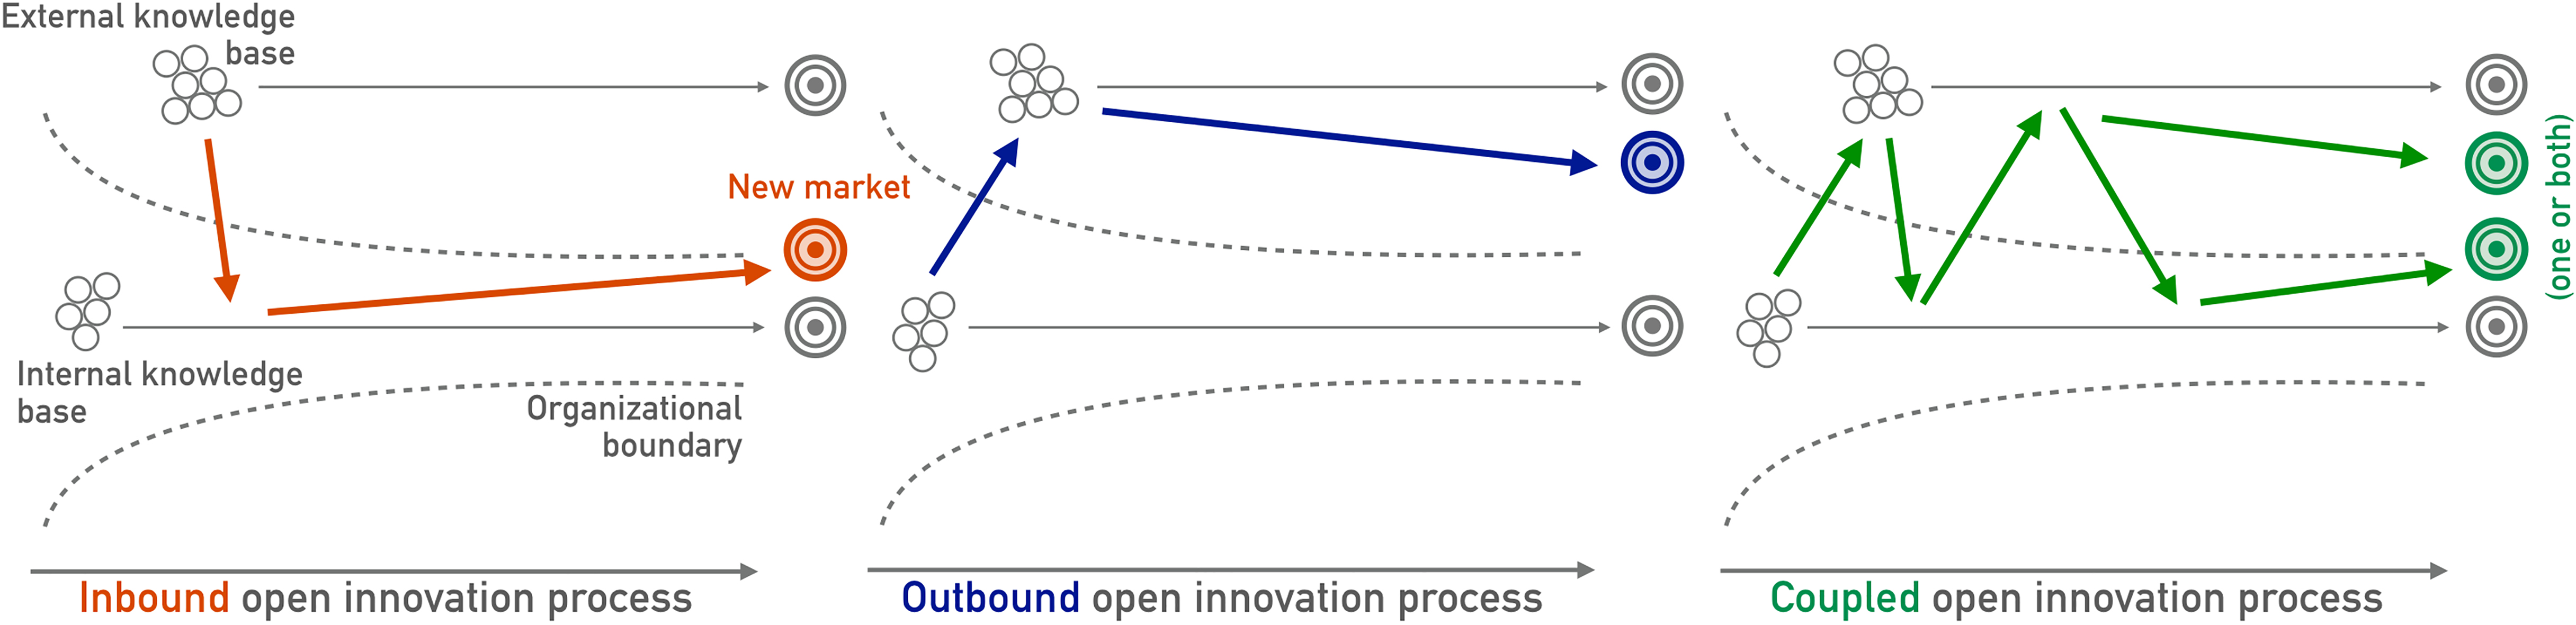 Three forms of open innovation (inspired by Chesbrough et al., 2014).